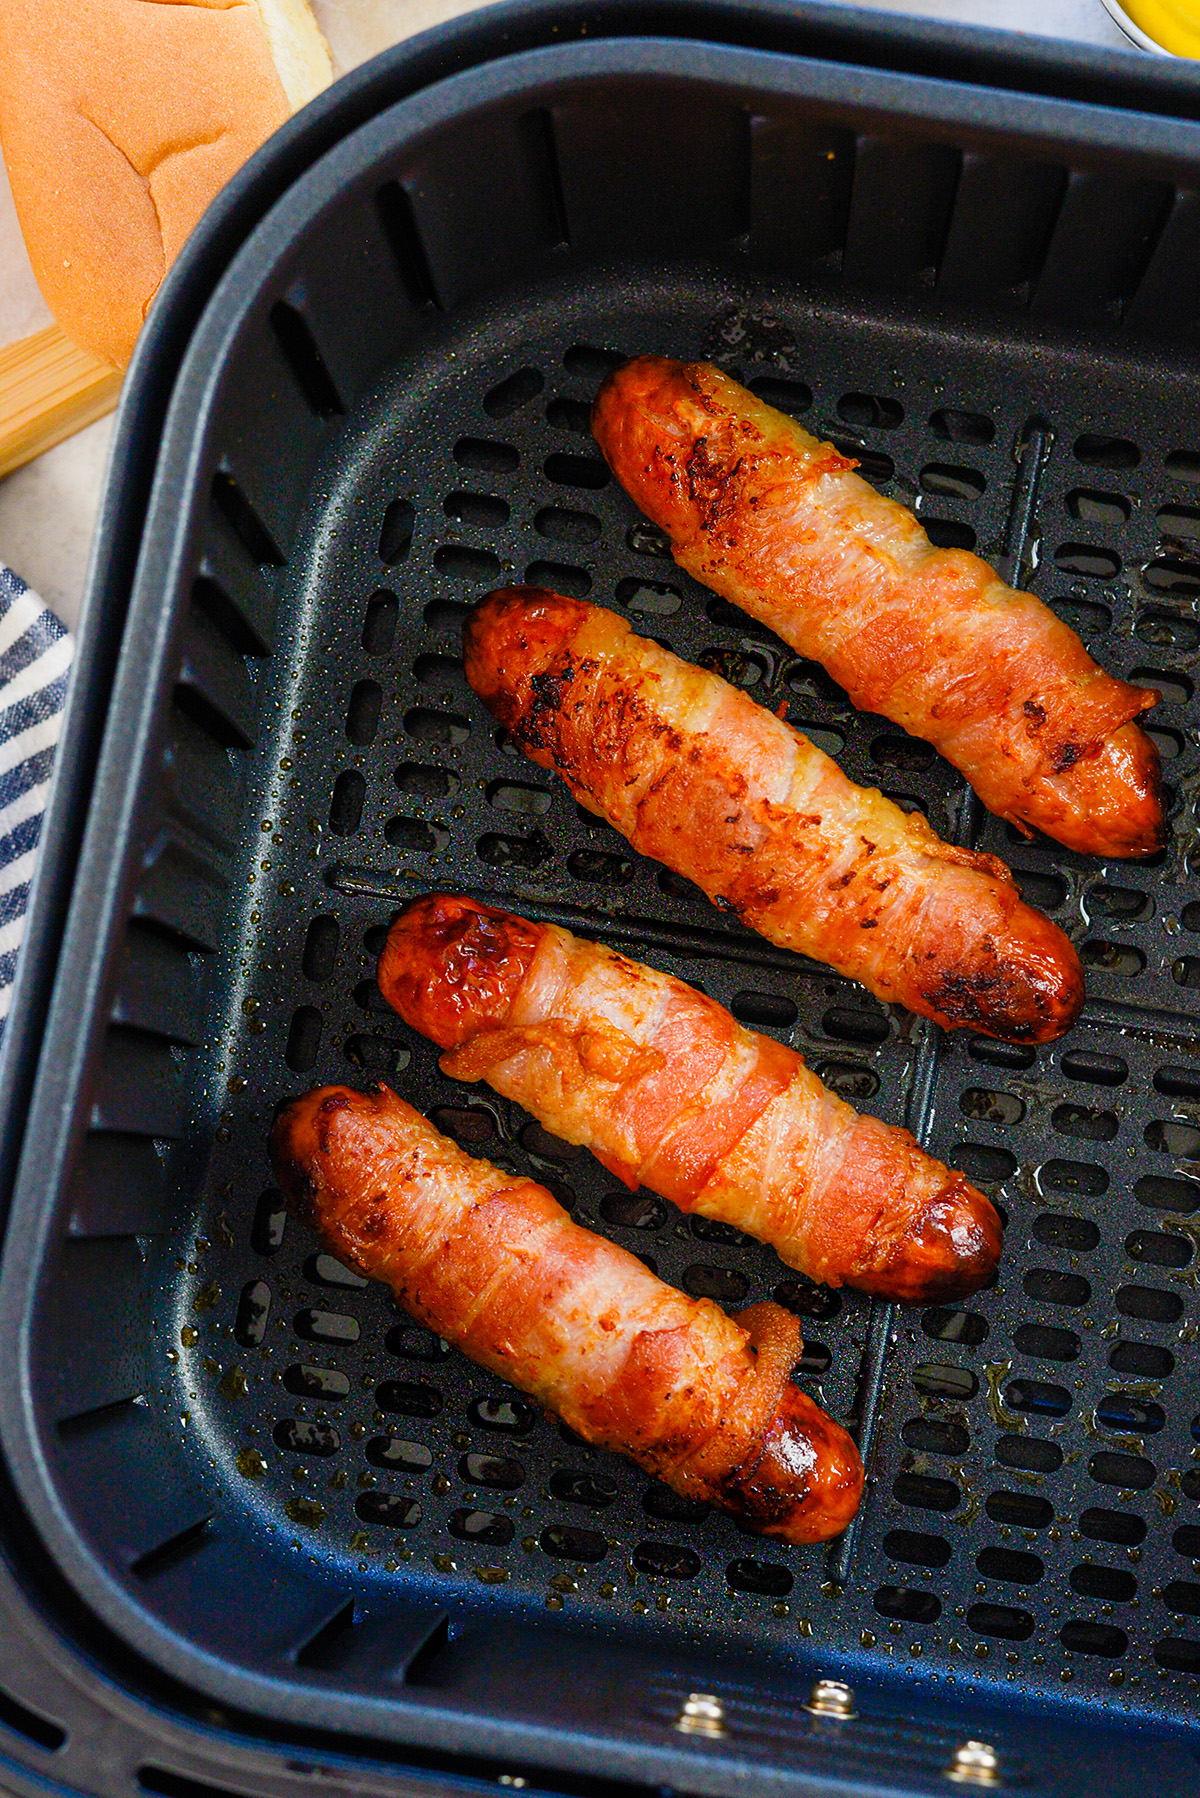 Four bacon wrapped hot dogs lined up in an air fryer basket.